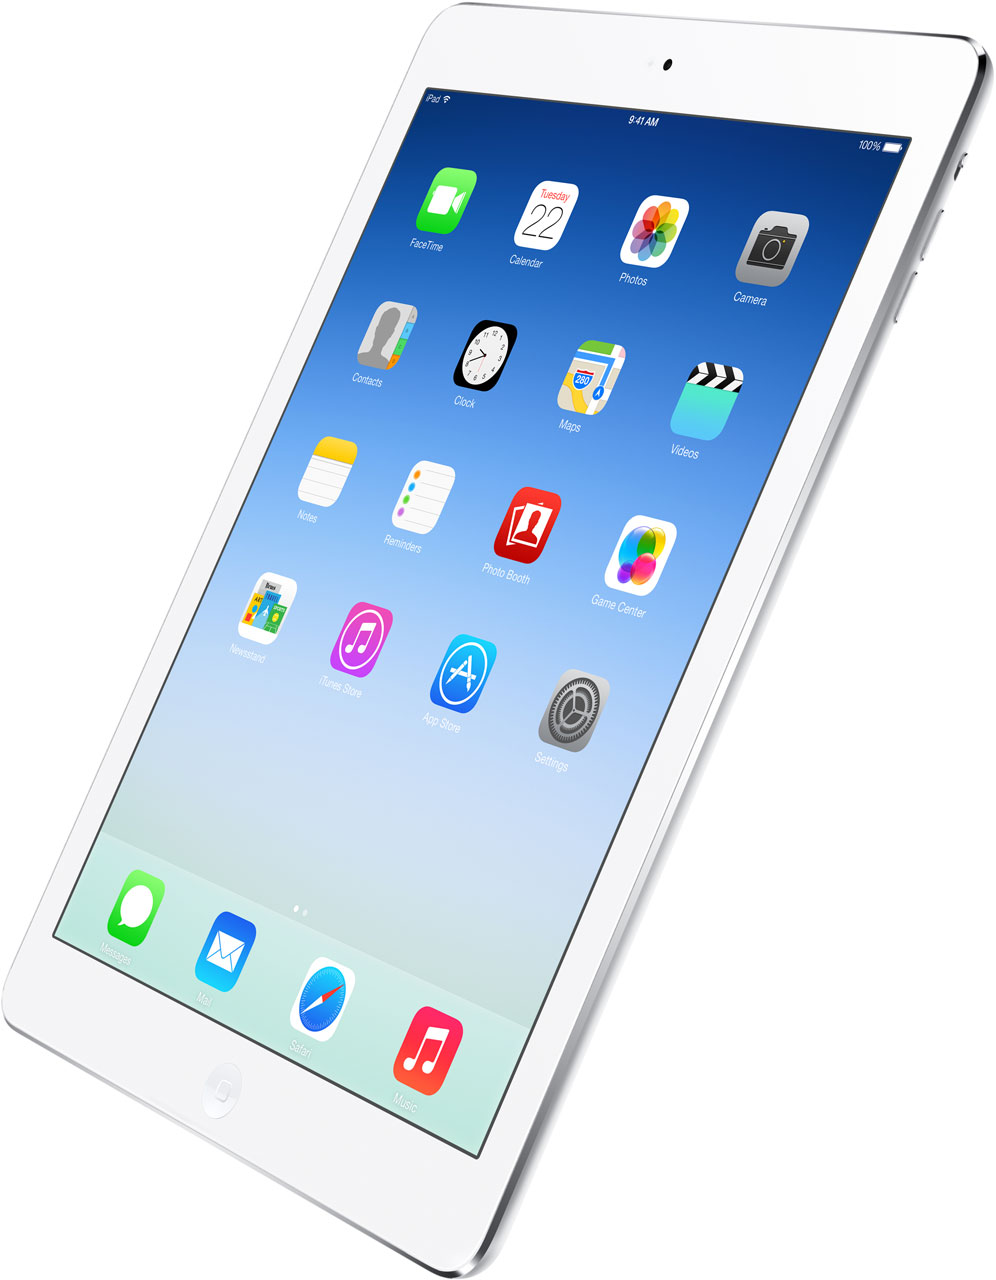 Design Review Of Apple iPad Air 2 The Most Perfect iPad